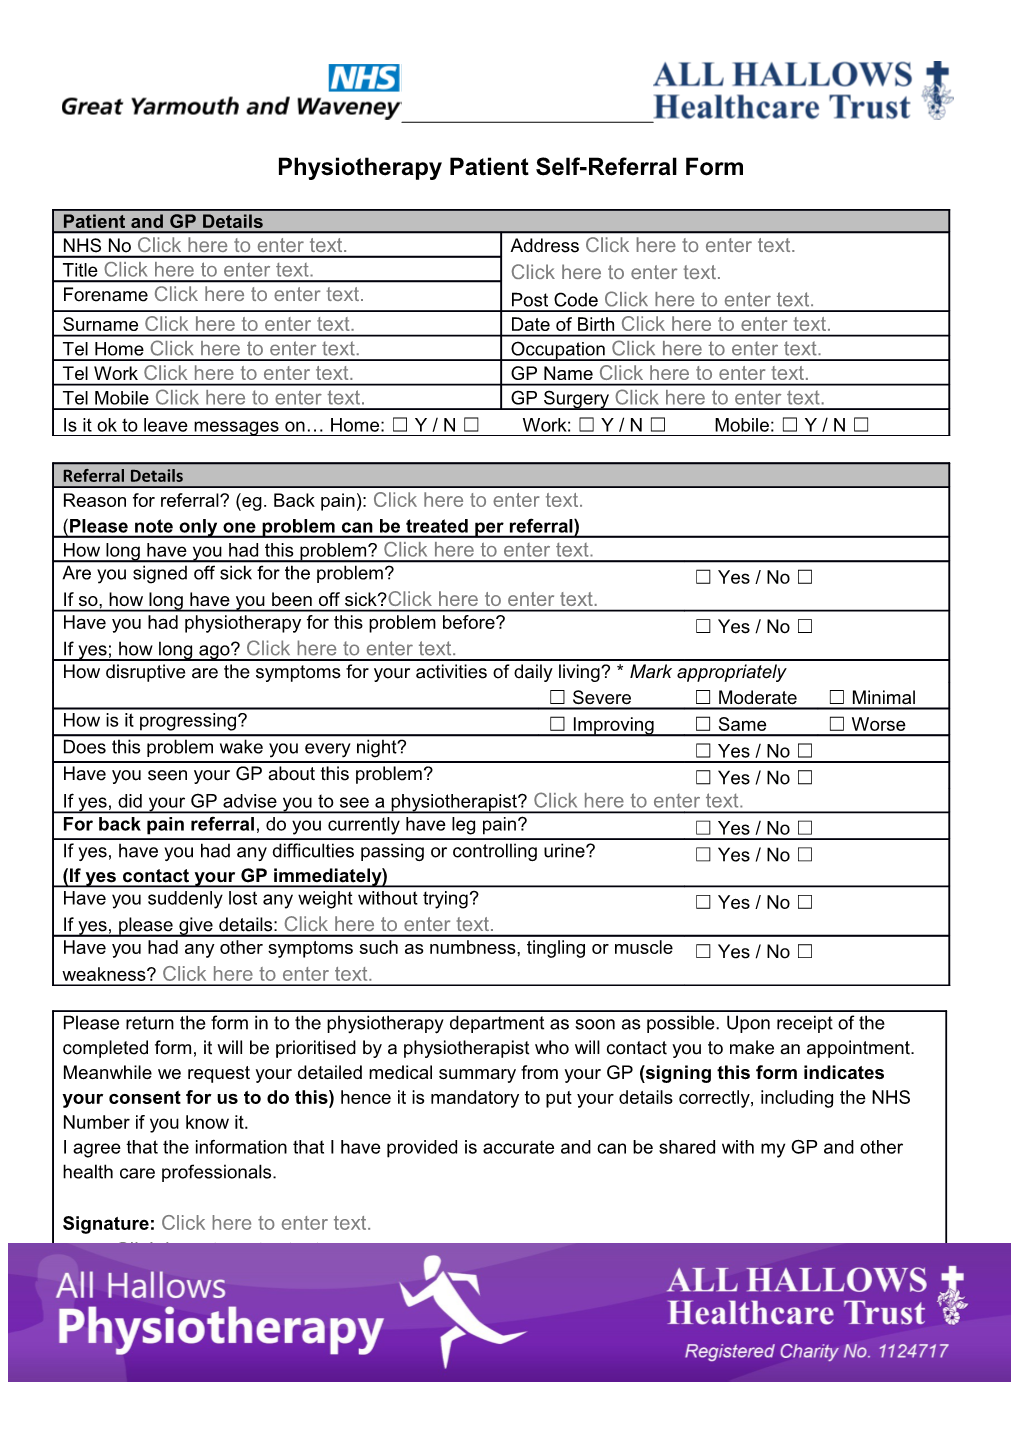 Physiotherapy Patient Self-Referral Form